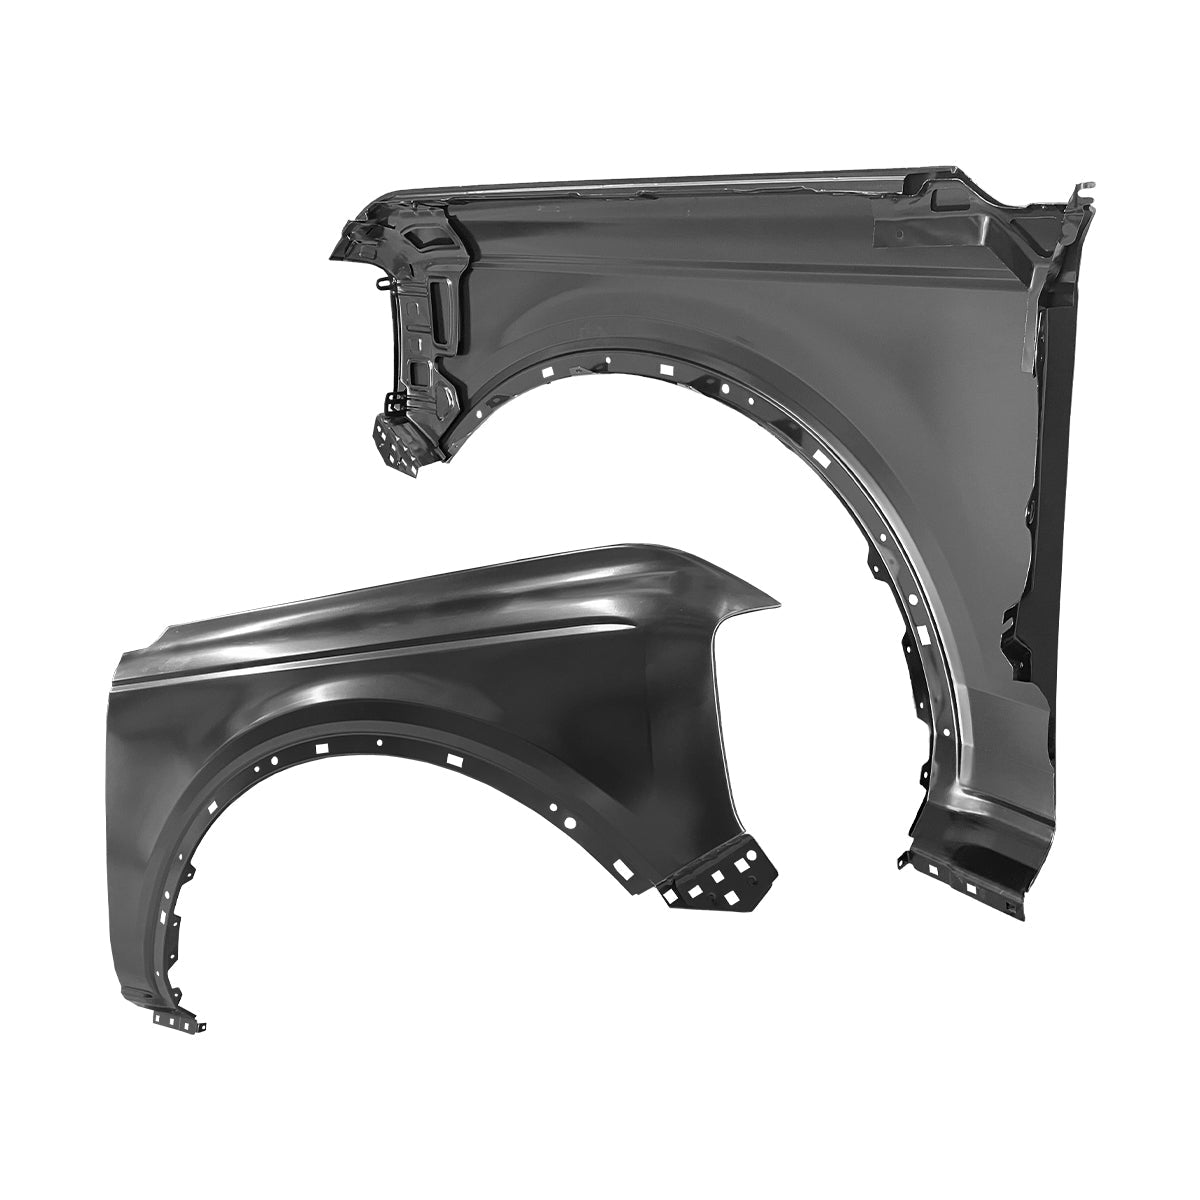 Replacement FRONT FENDER, RH, 2021-2023 Ford Bronco, M2DZ16005A, (Steel)